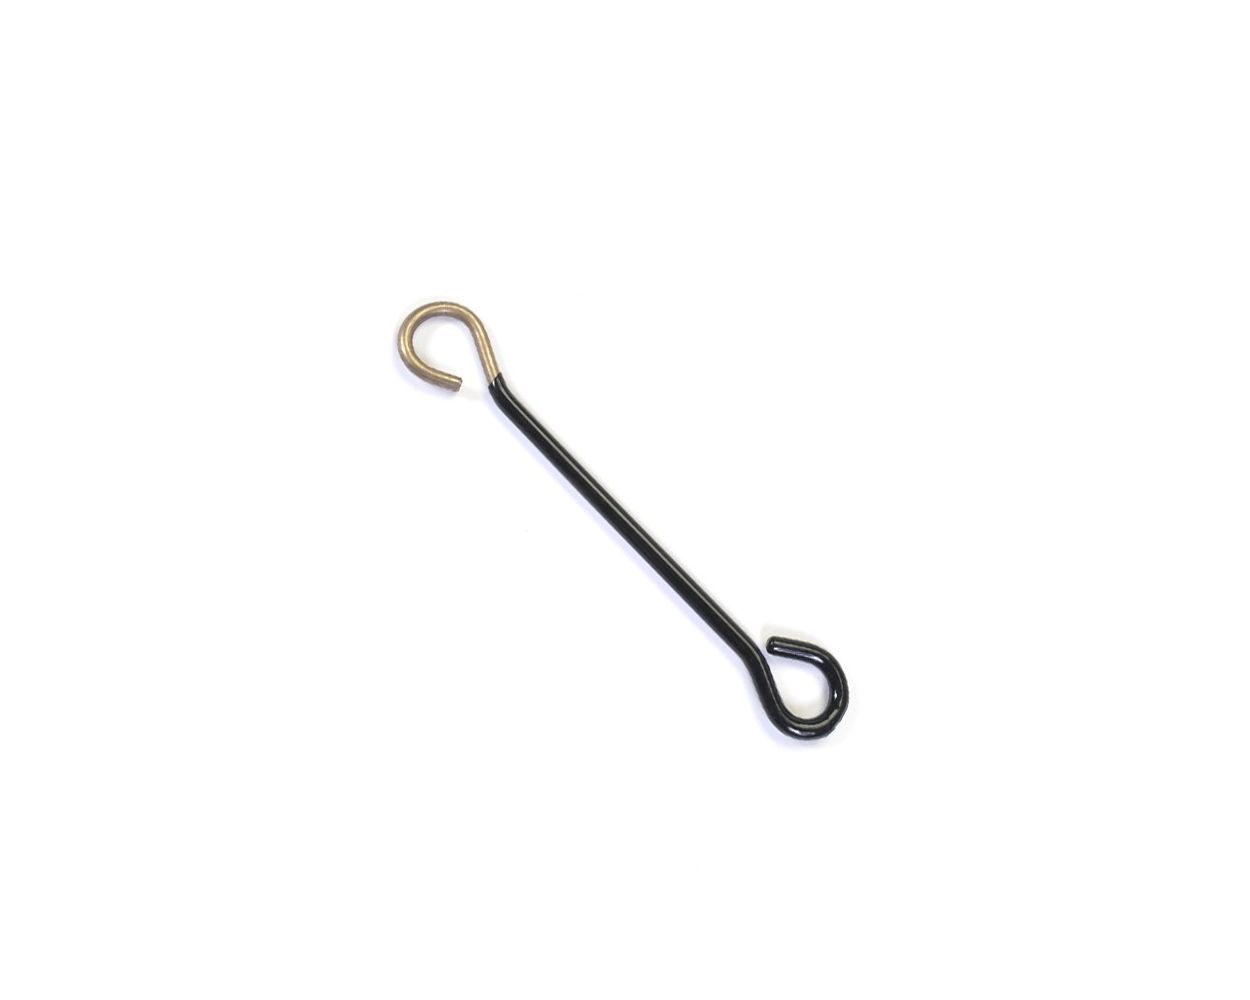 24 inch Competitor Swim Racing Lane Coated Extension S Hook